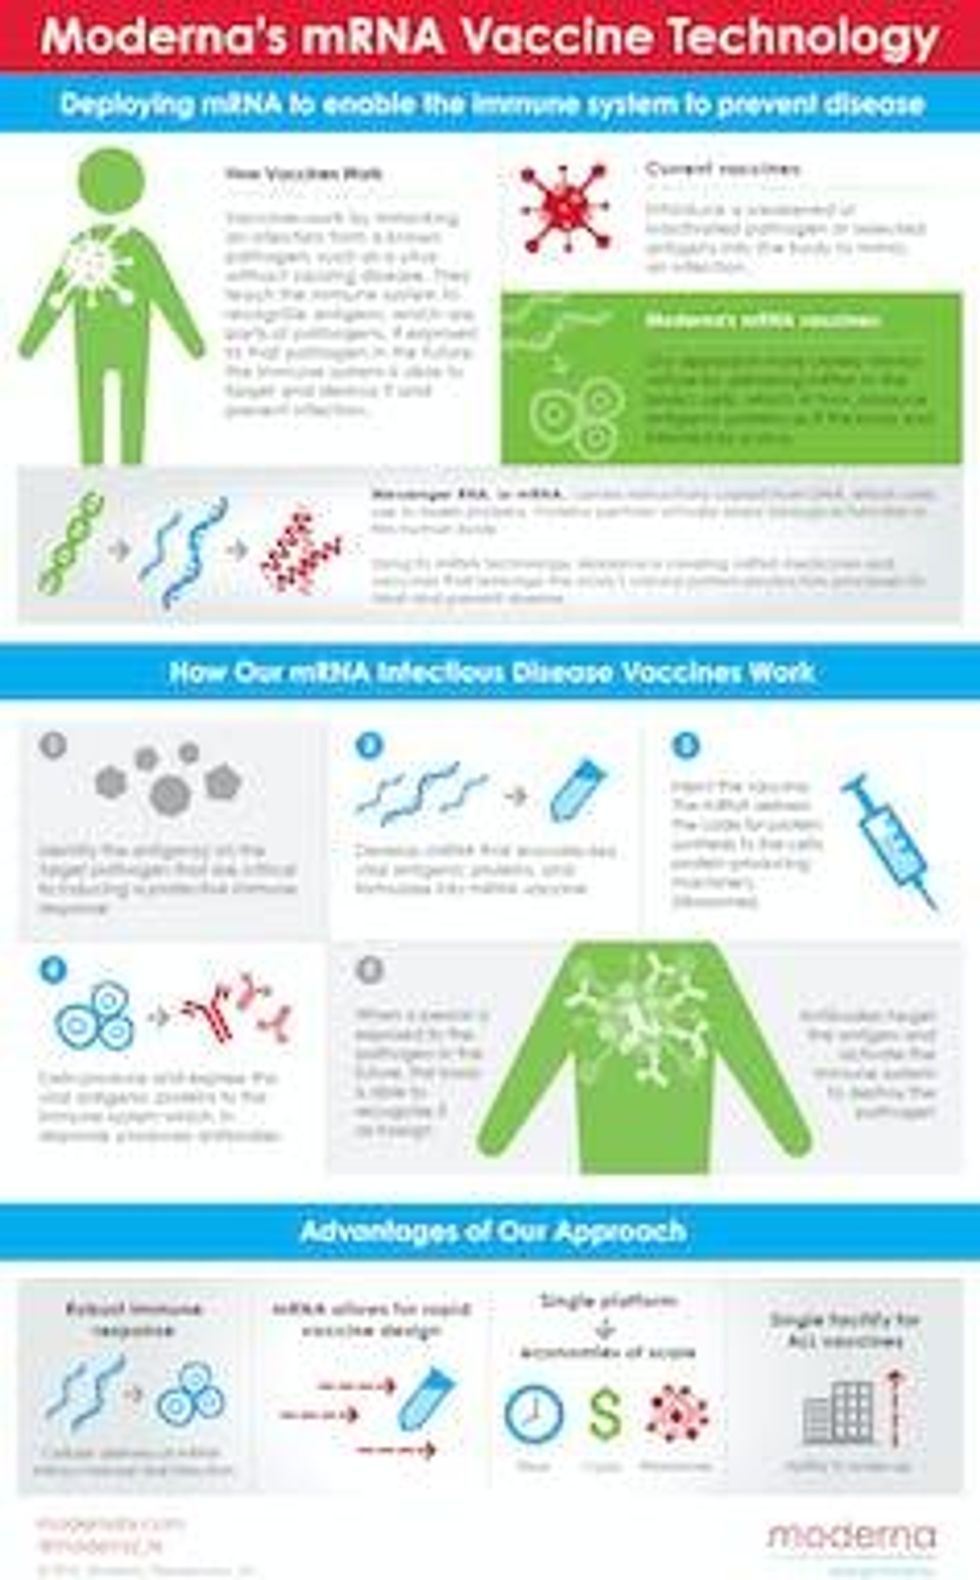 A graphic shows how its mRNA technology works